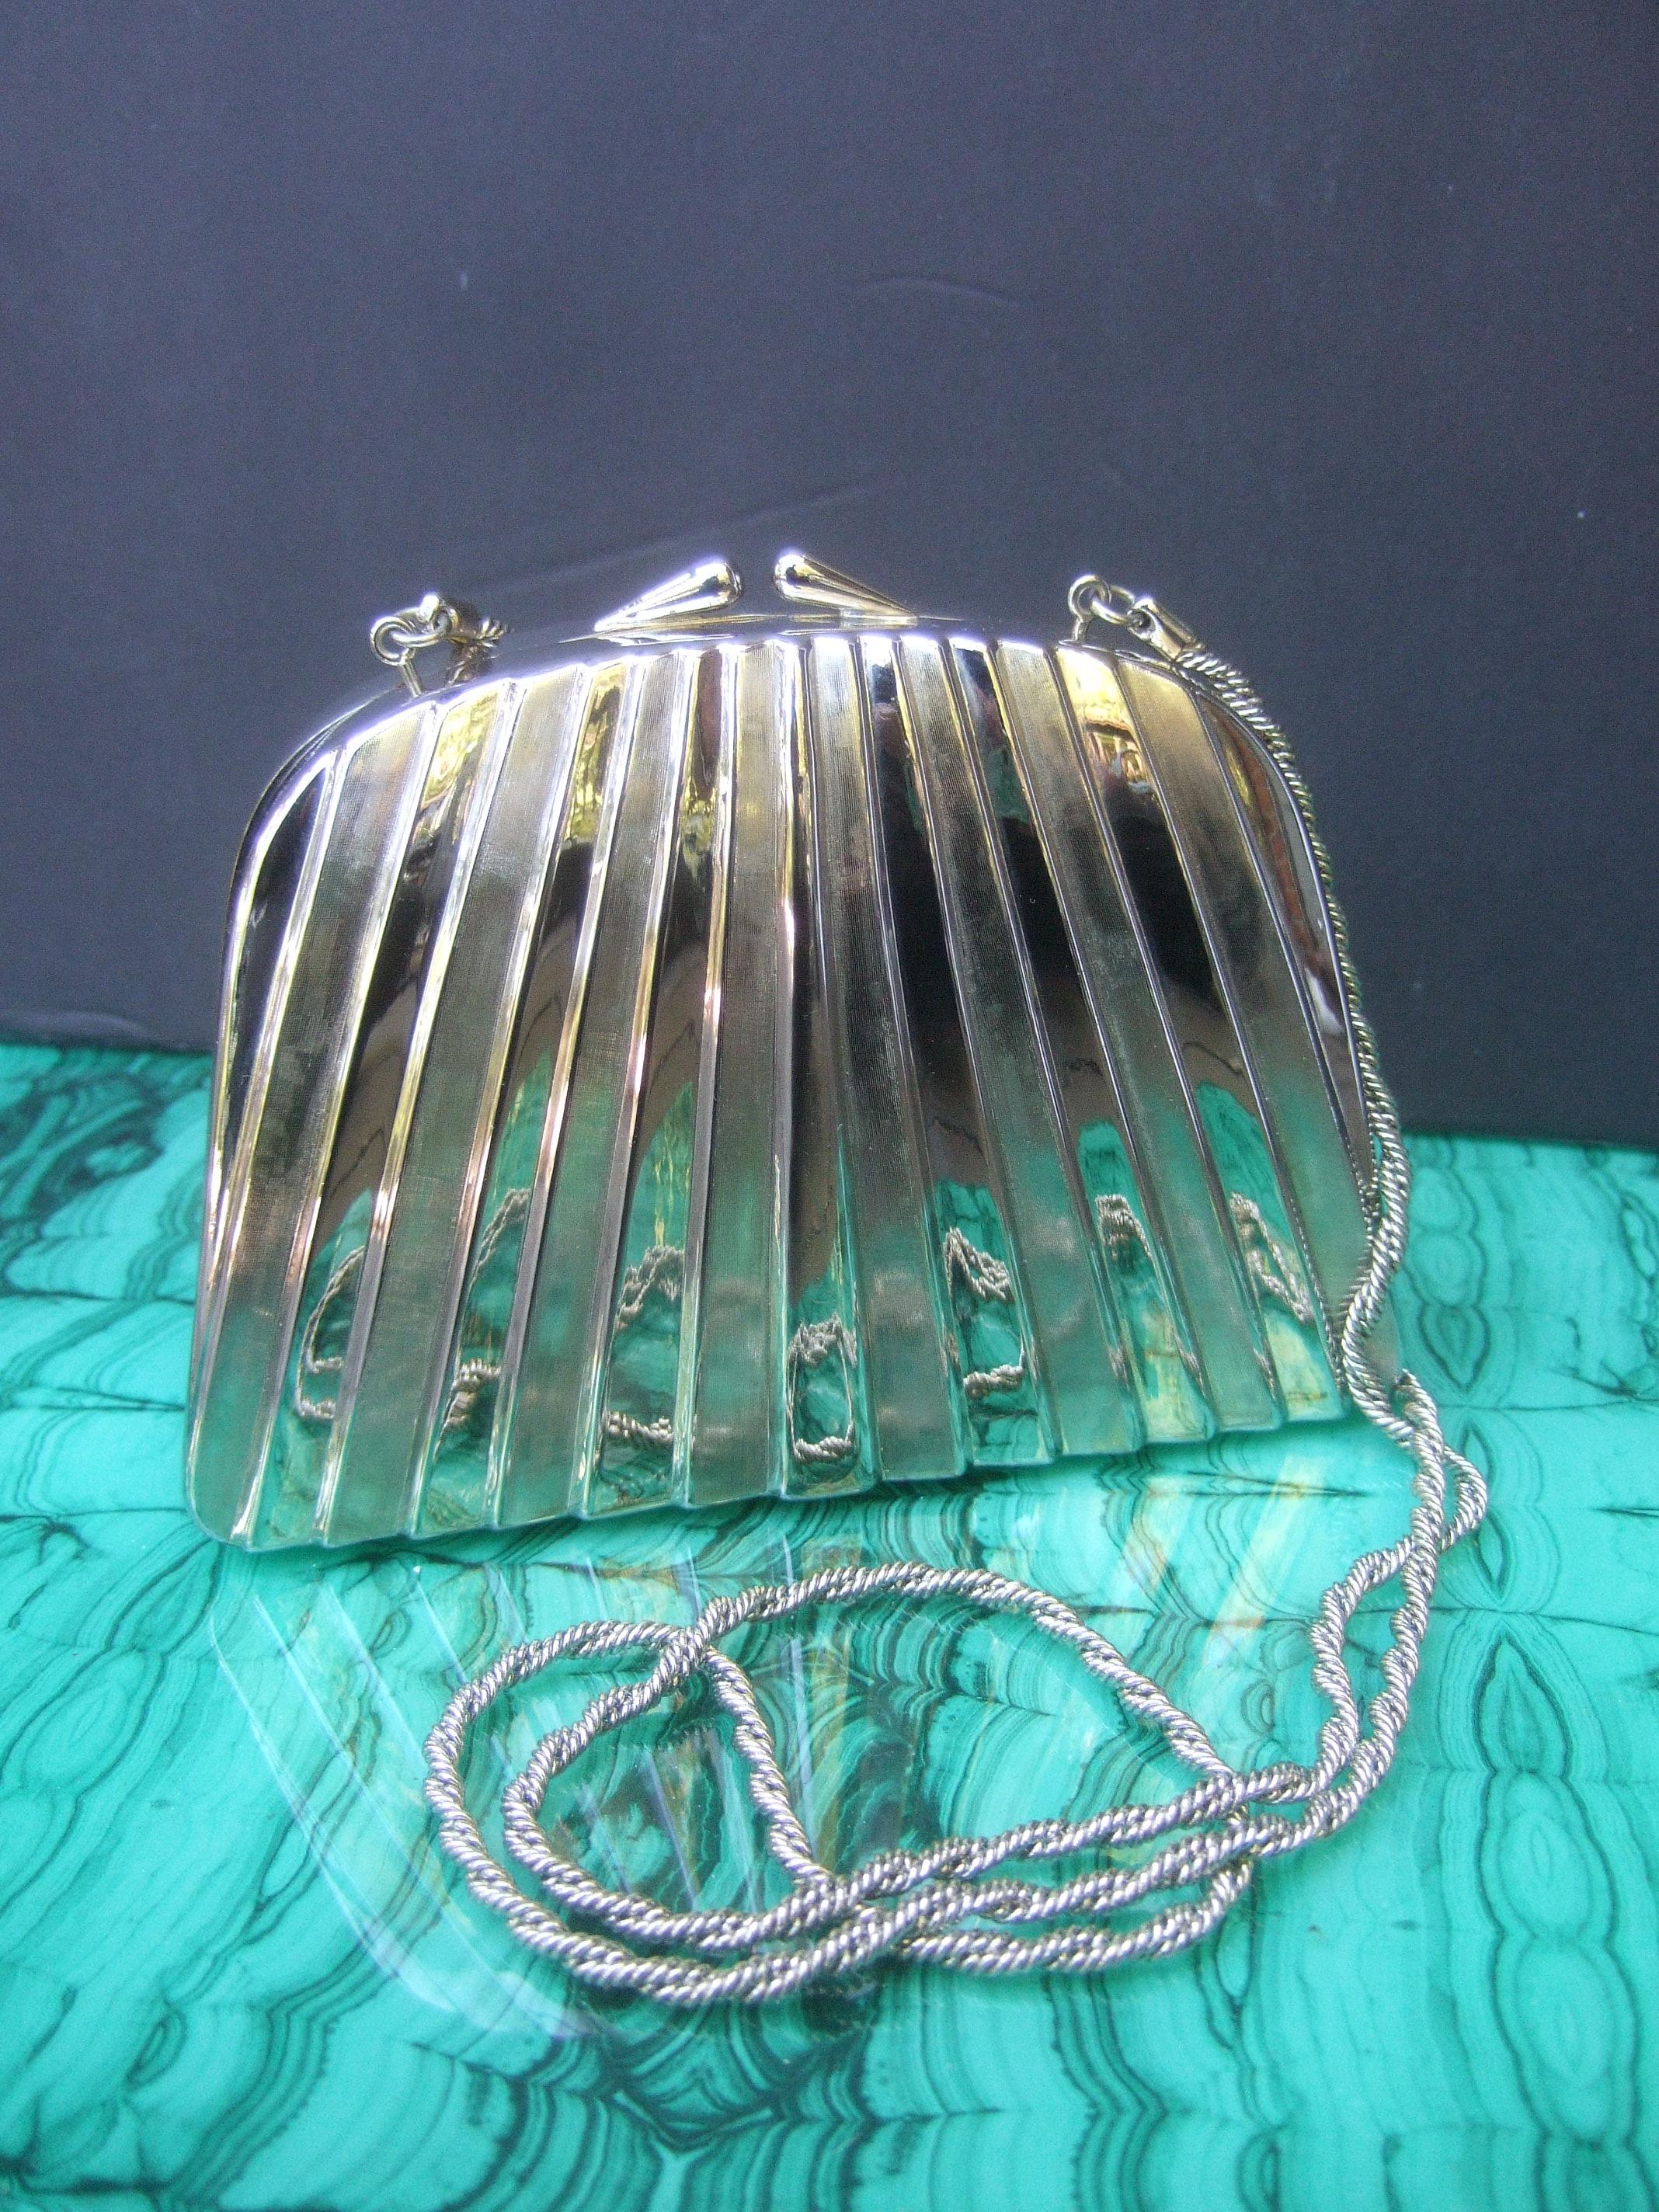 Neiman Marcus Italian silver metal minaudiere evening bag c 1970s
The elegant silver metal evening bag is designed with impressed vertical linear bands that alternate from shiny polished silver metal; juxtaposed with brushed satin tone vertical